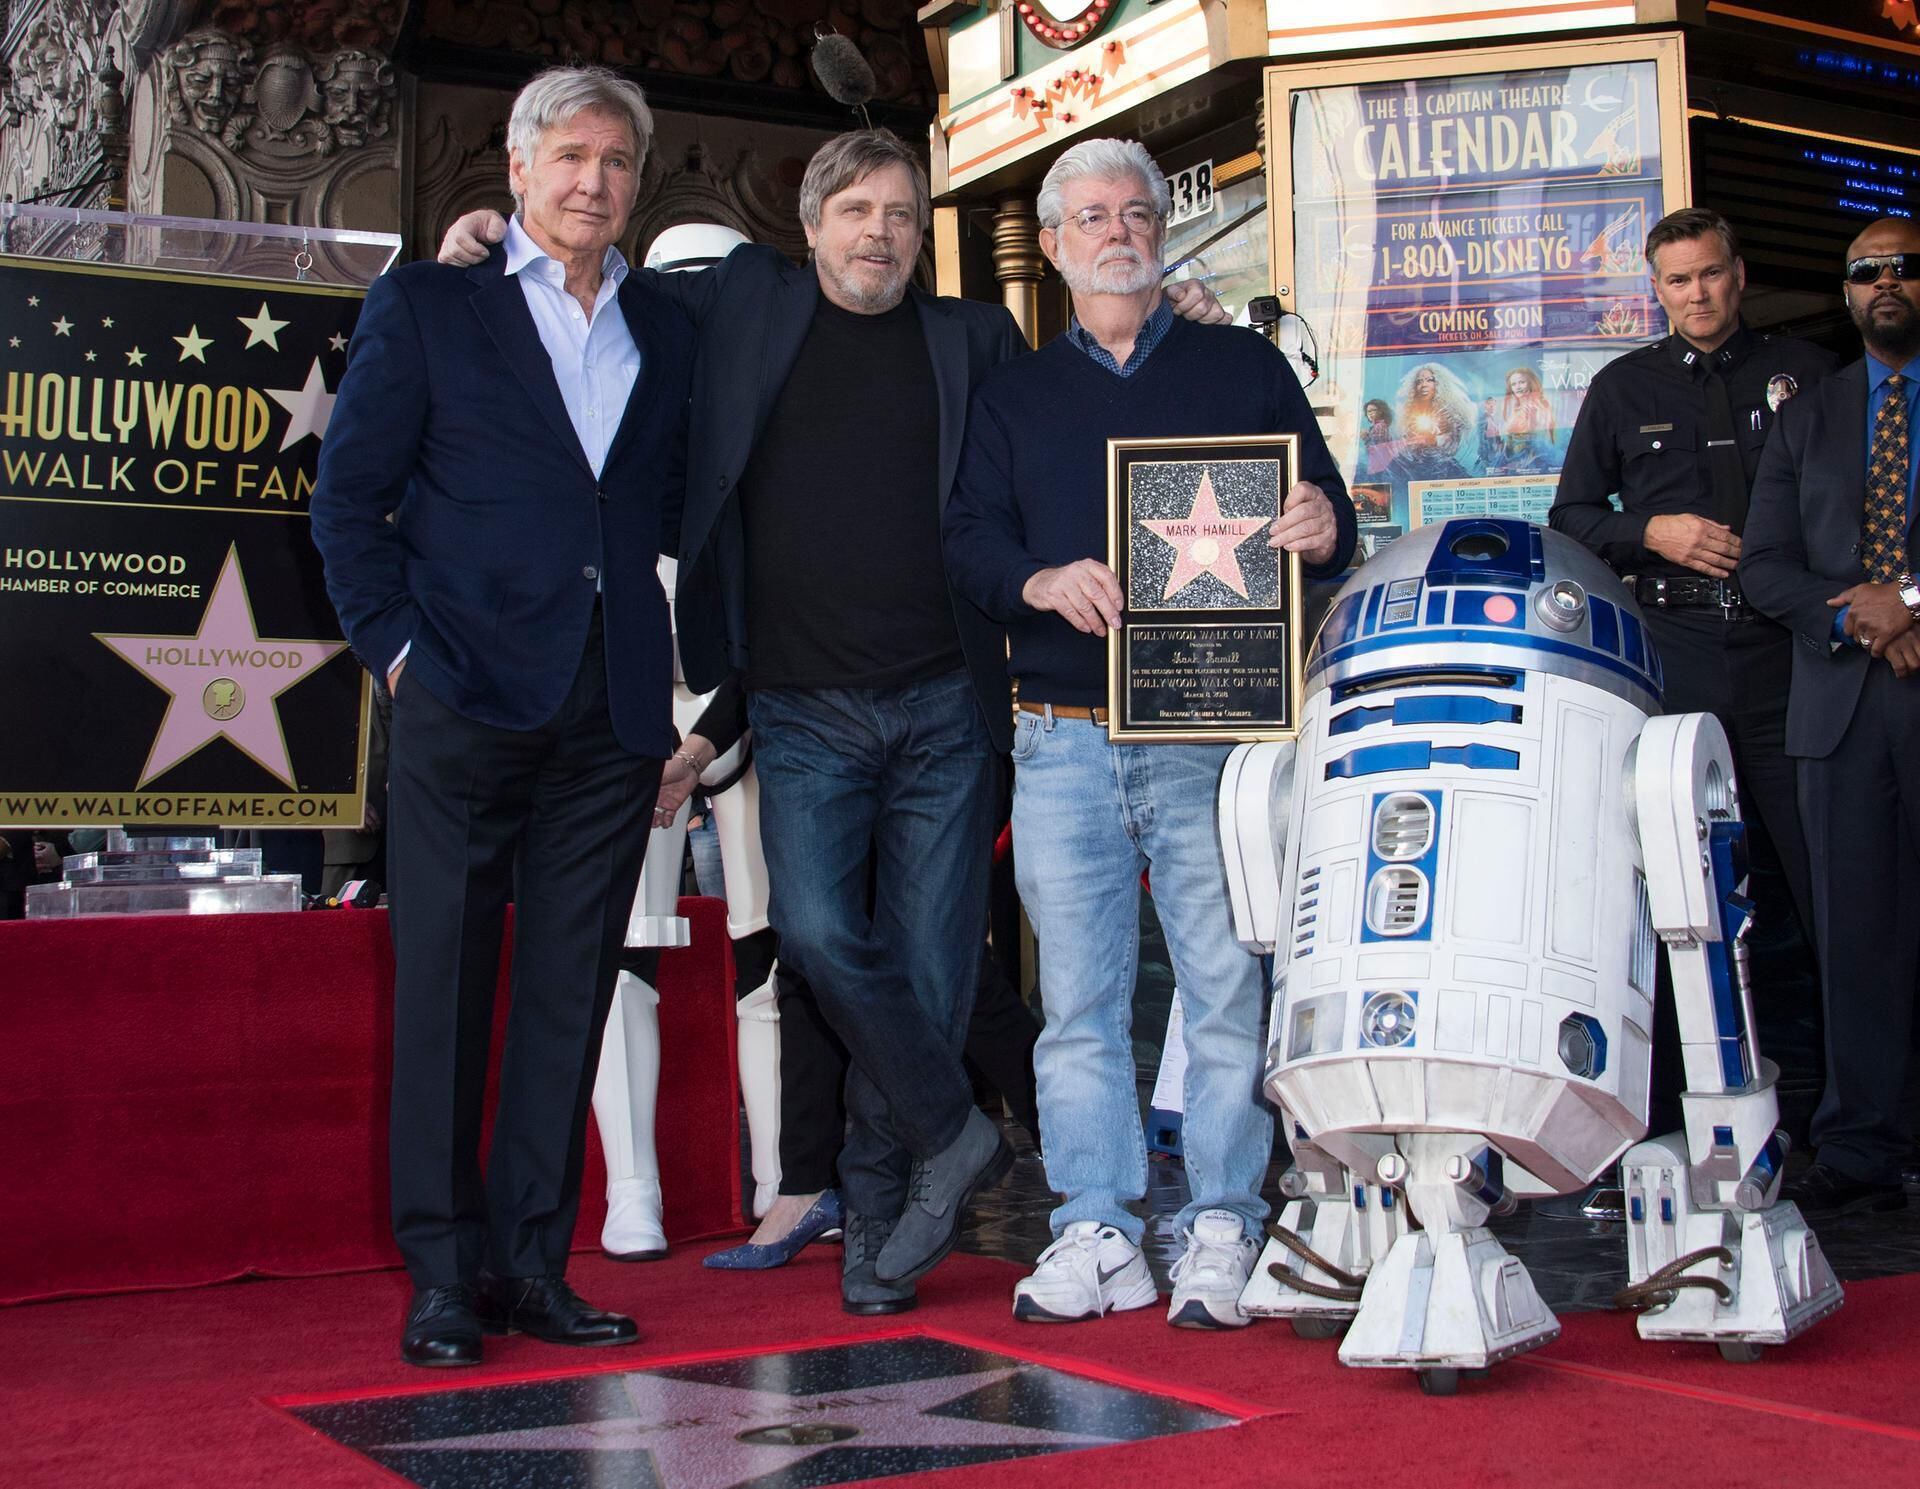 Mark Hamill bags Hollywood star, with no wars required